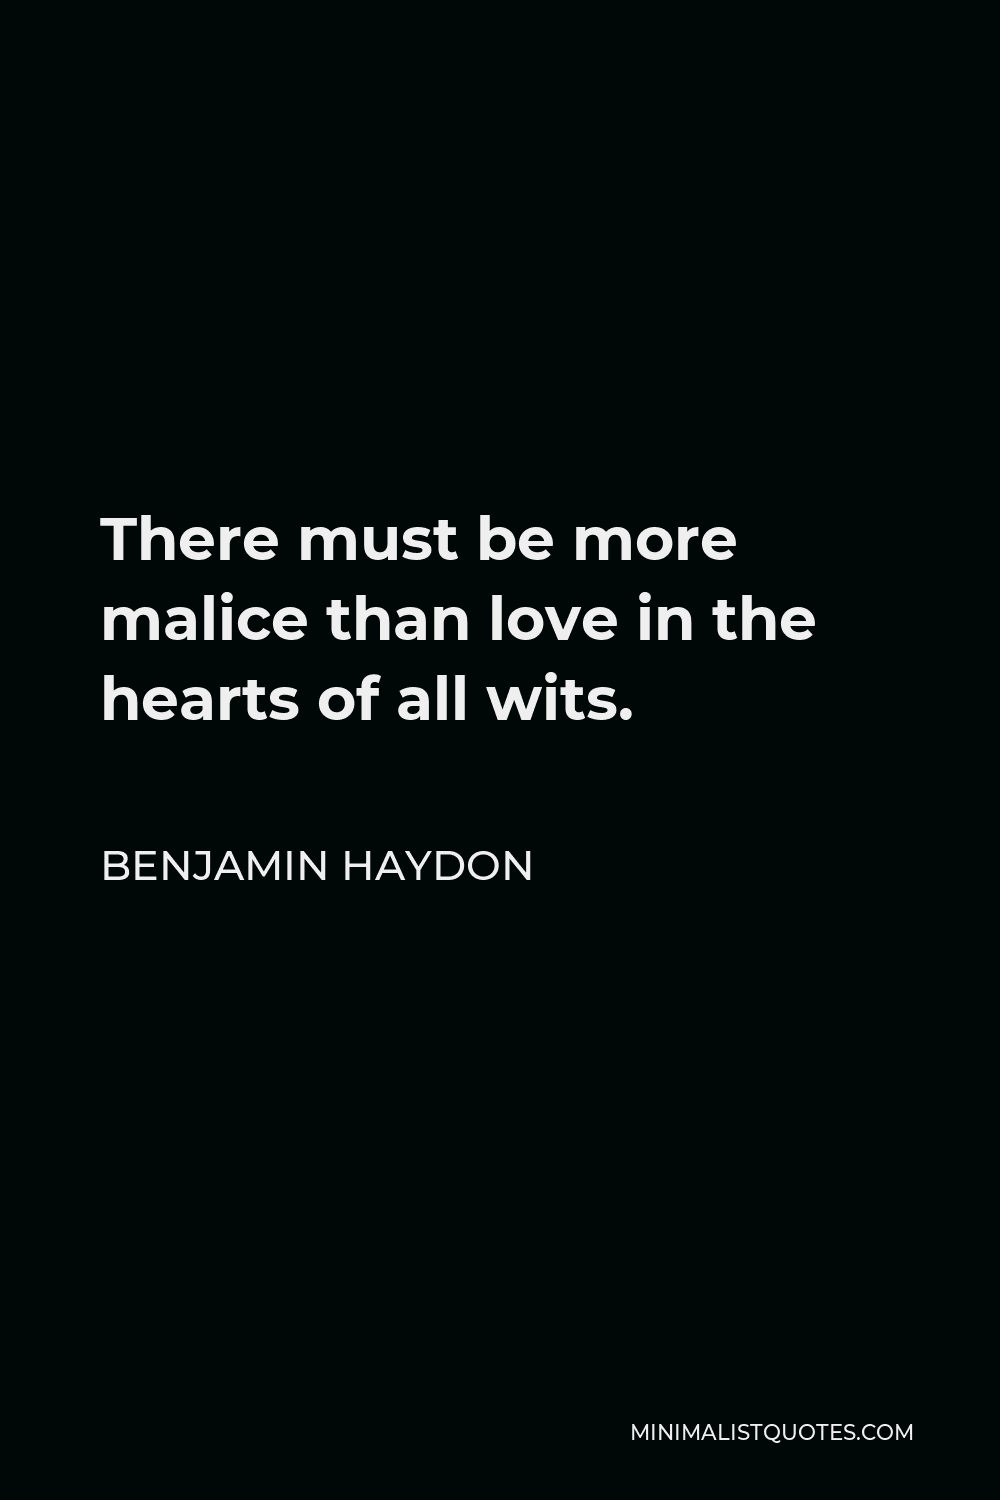 Benjamin Haydon Quote - There must be more malice than love in the hearts of all wits.